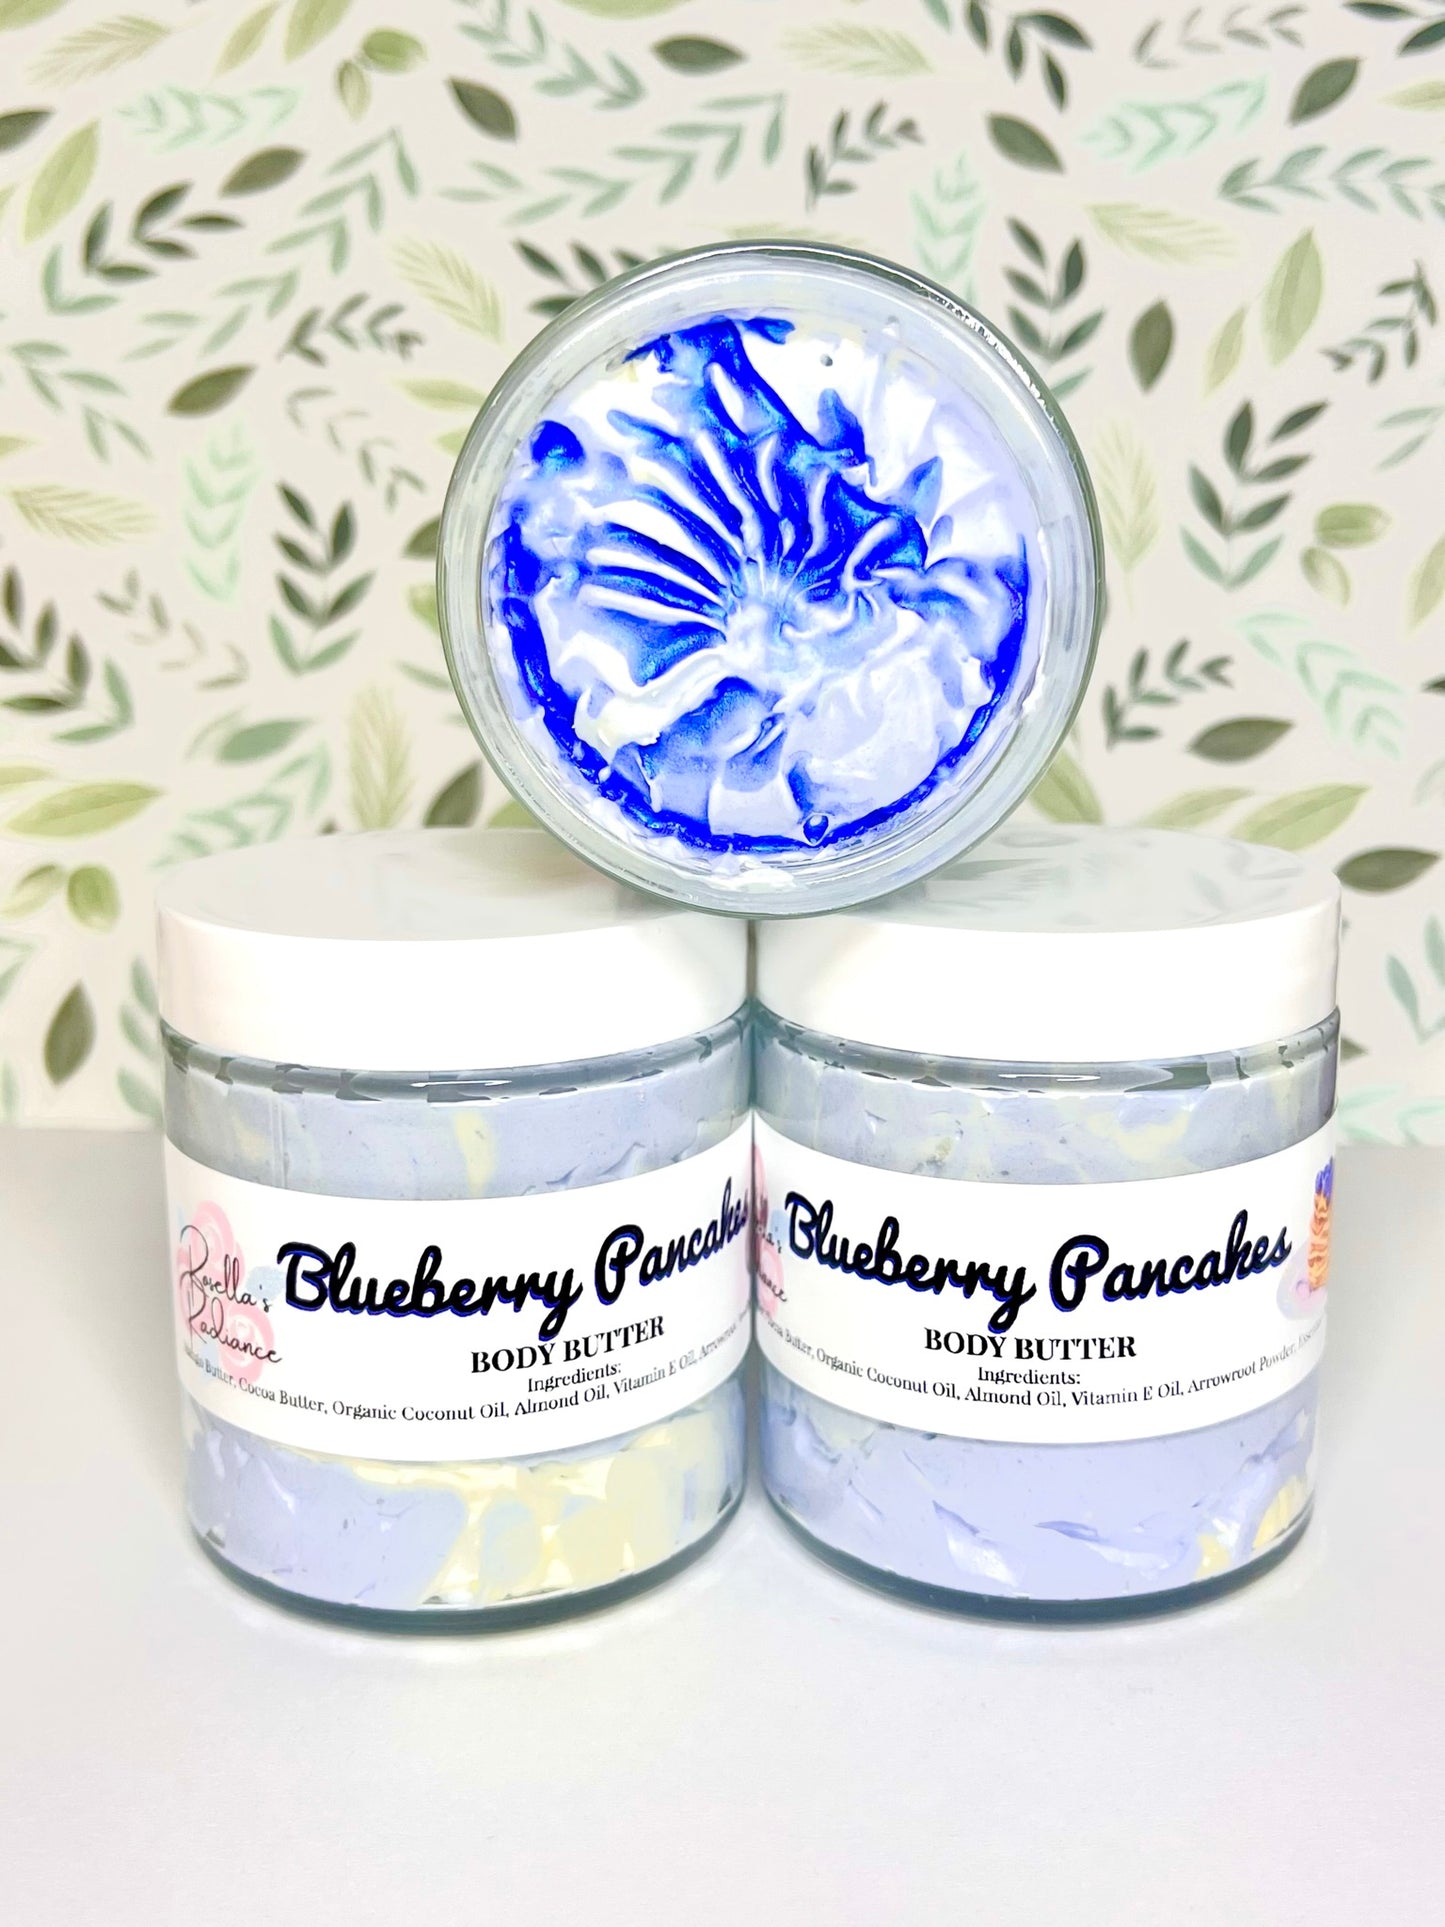 Blueberry Pancakes Body Butter